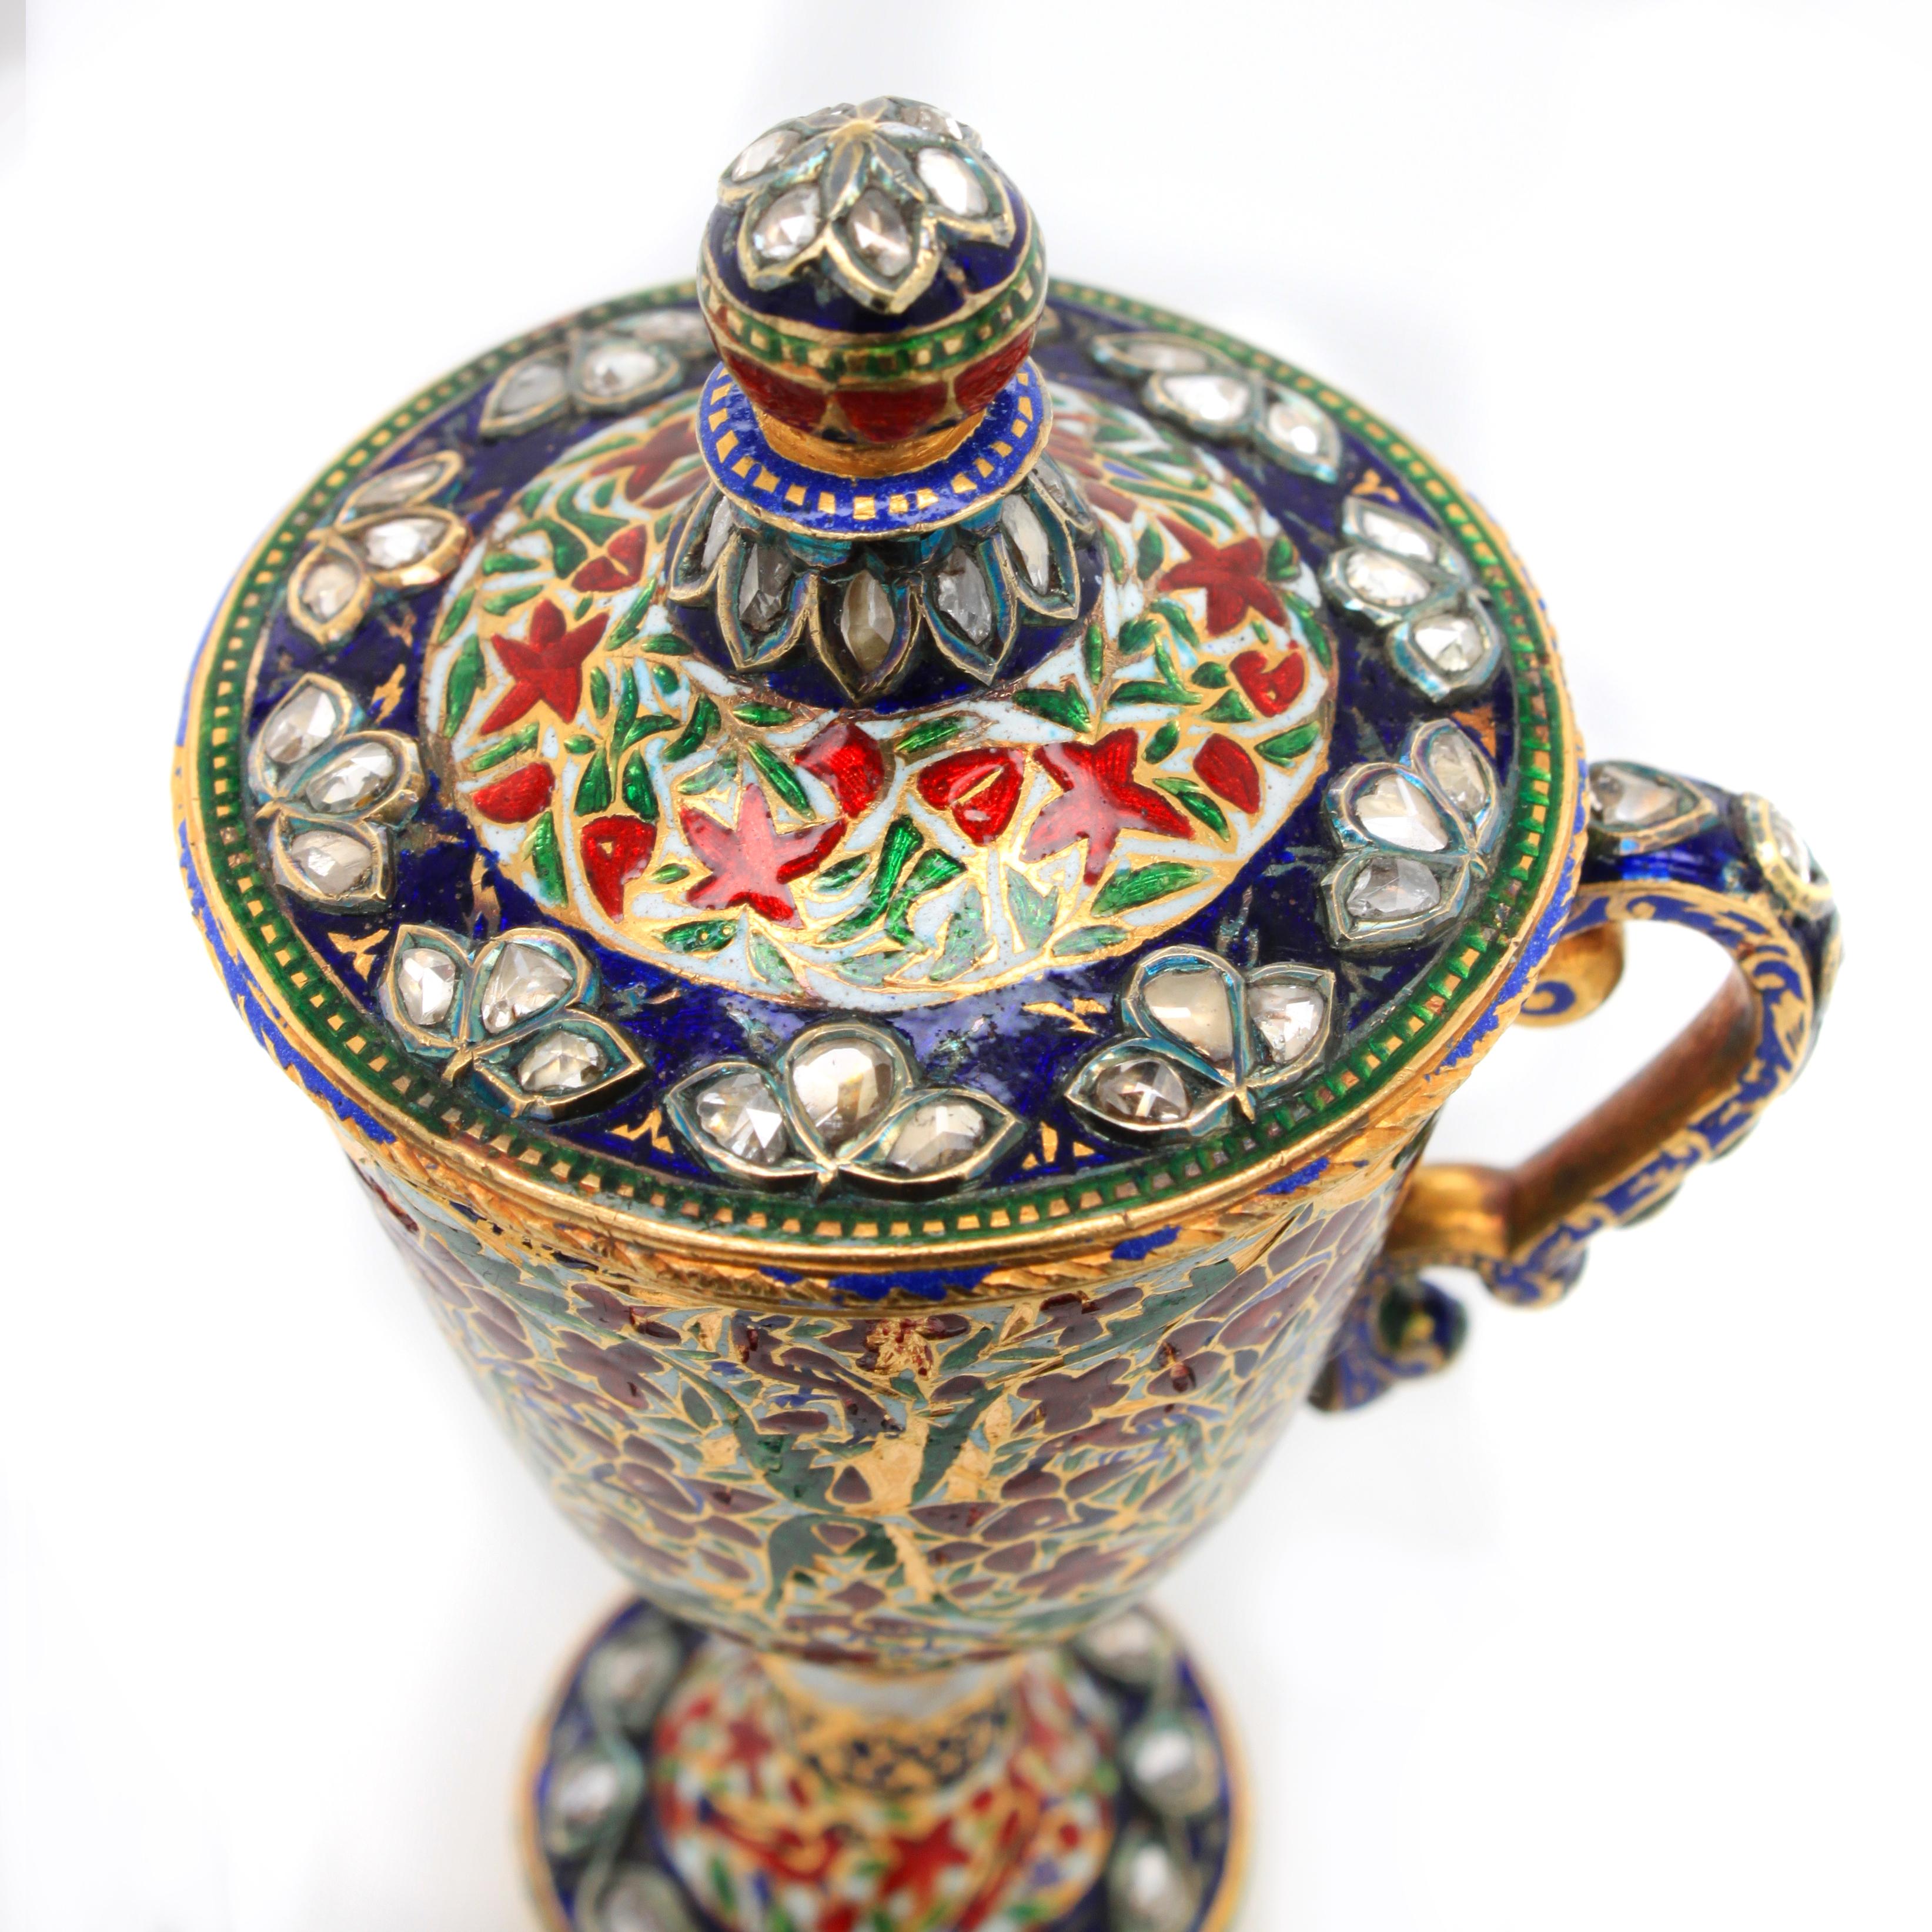 Rare Mughal Enamel and Diamond Cup, Early 19th Century For Sale 4